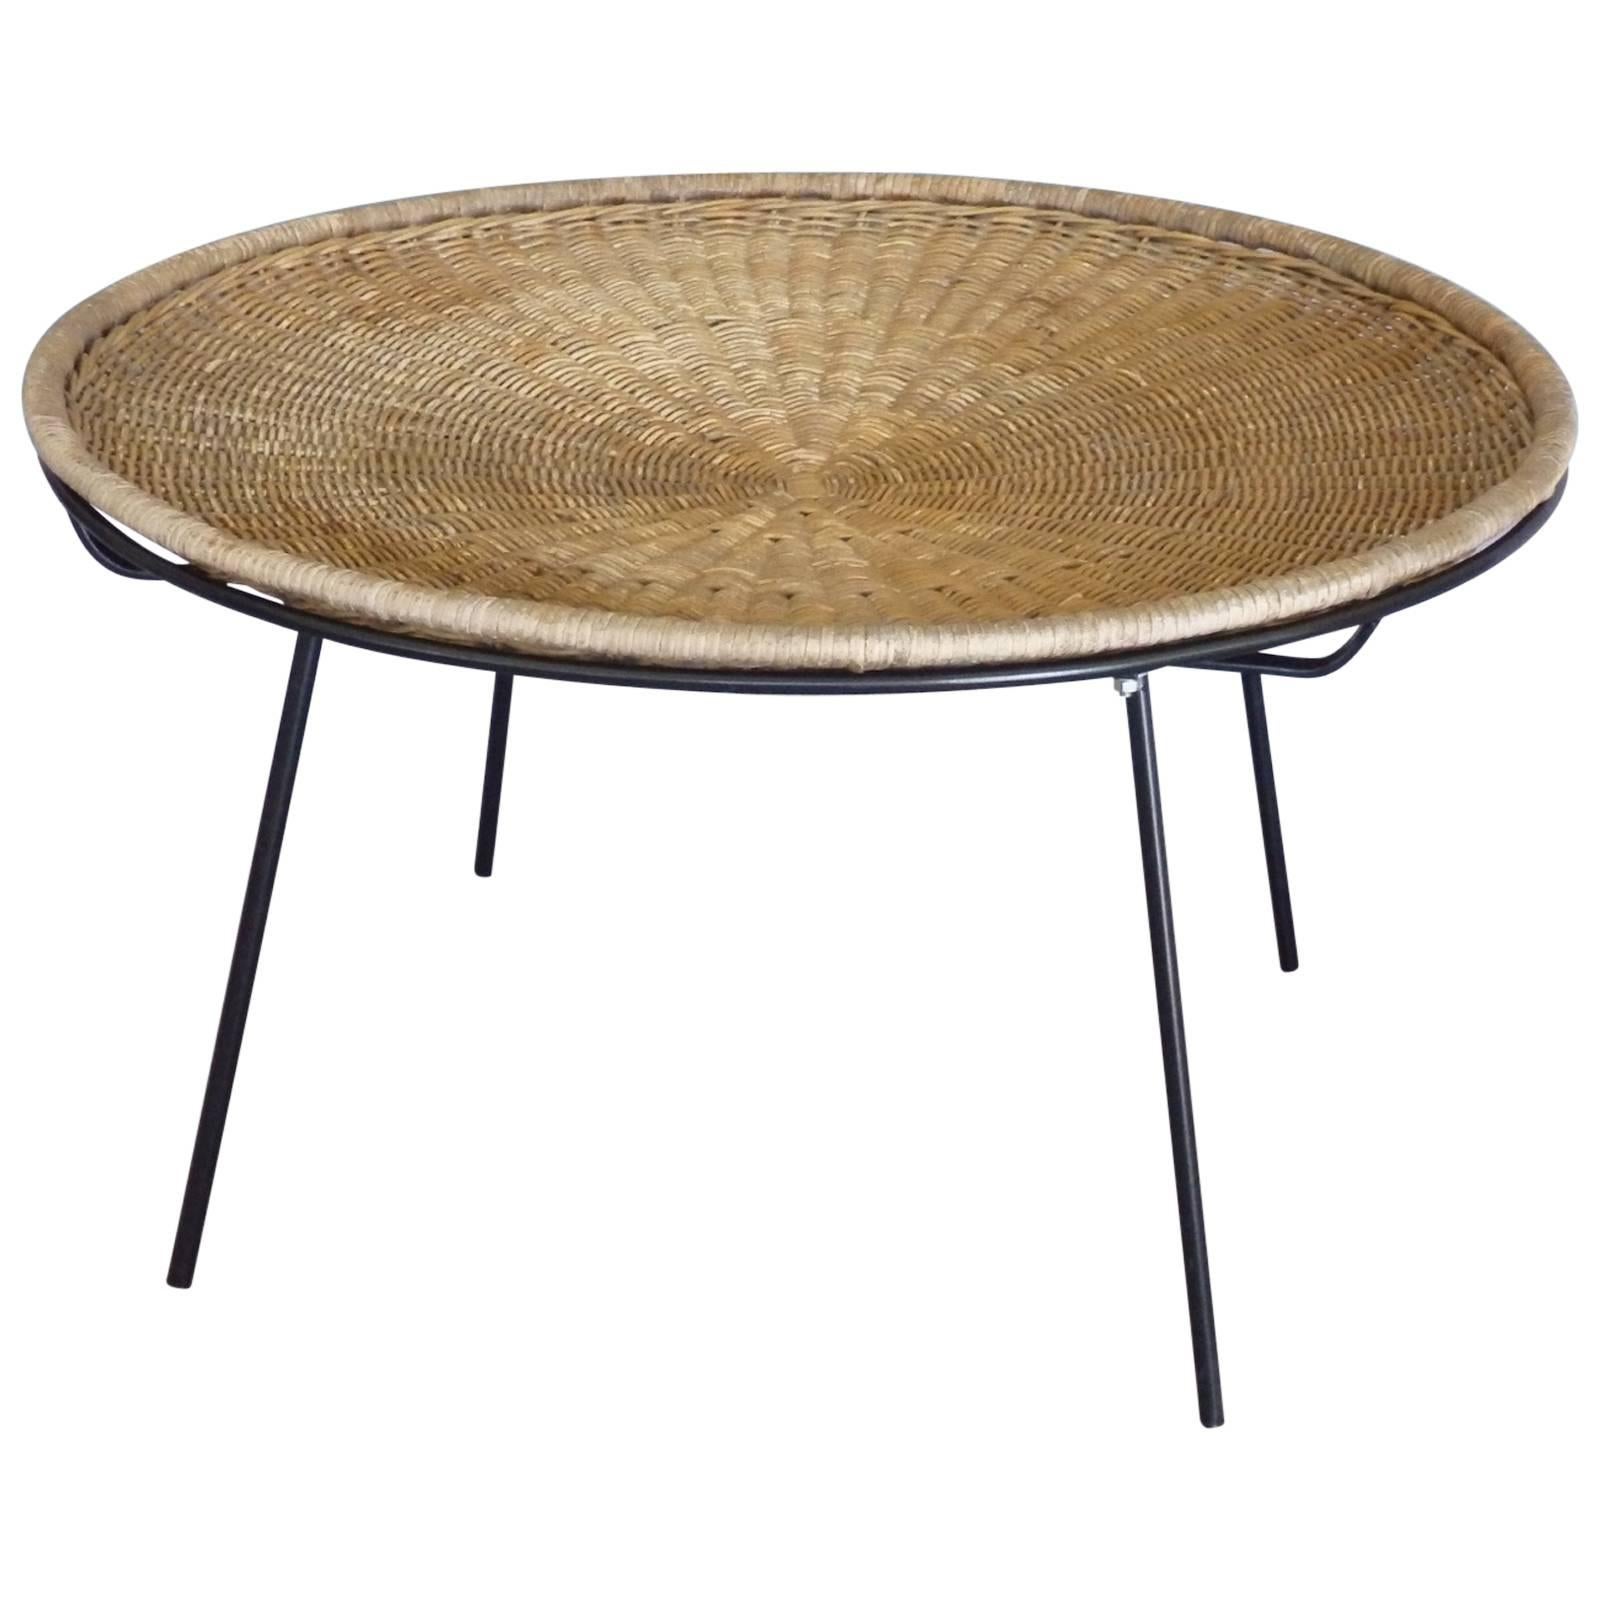 Rattan on Wrought Iron Catch All Coffee Table